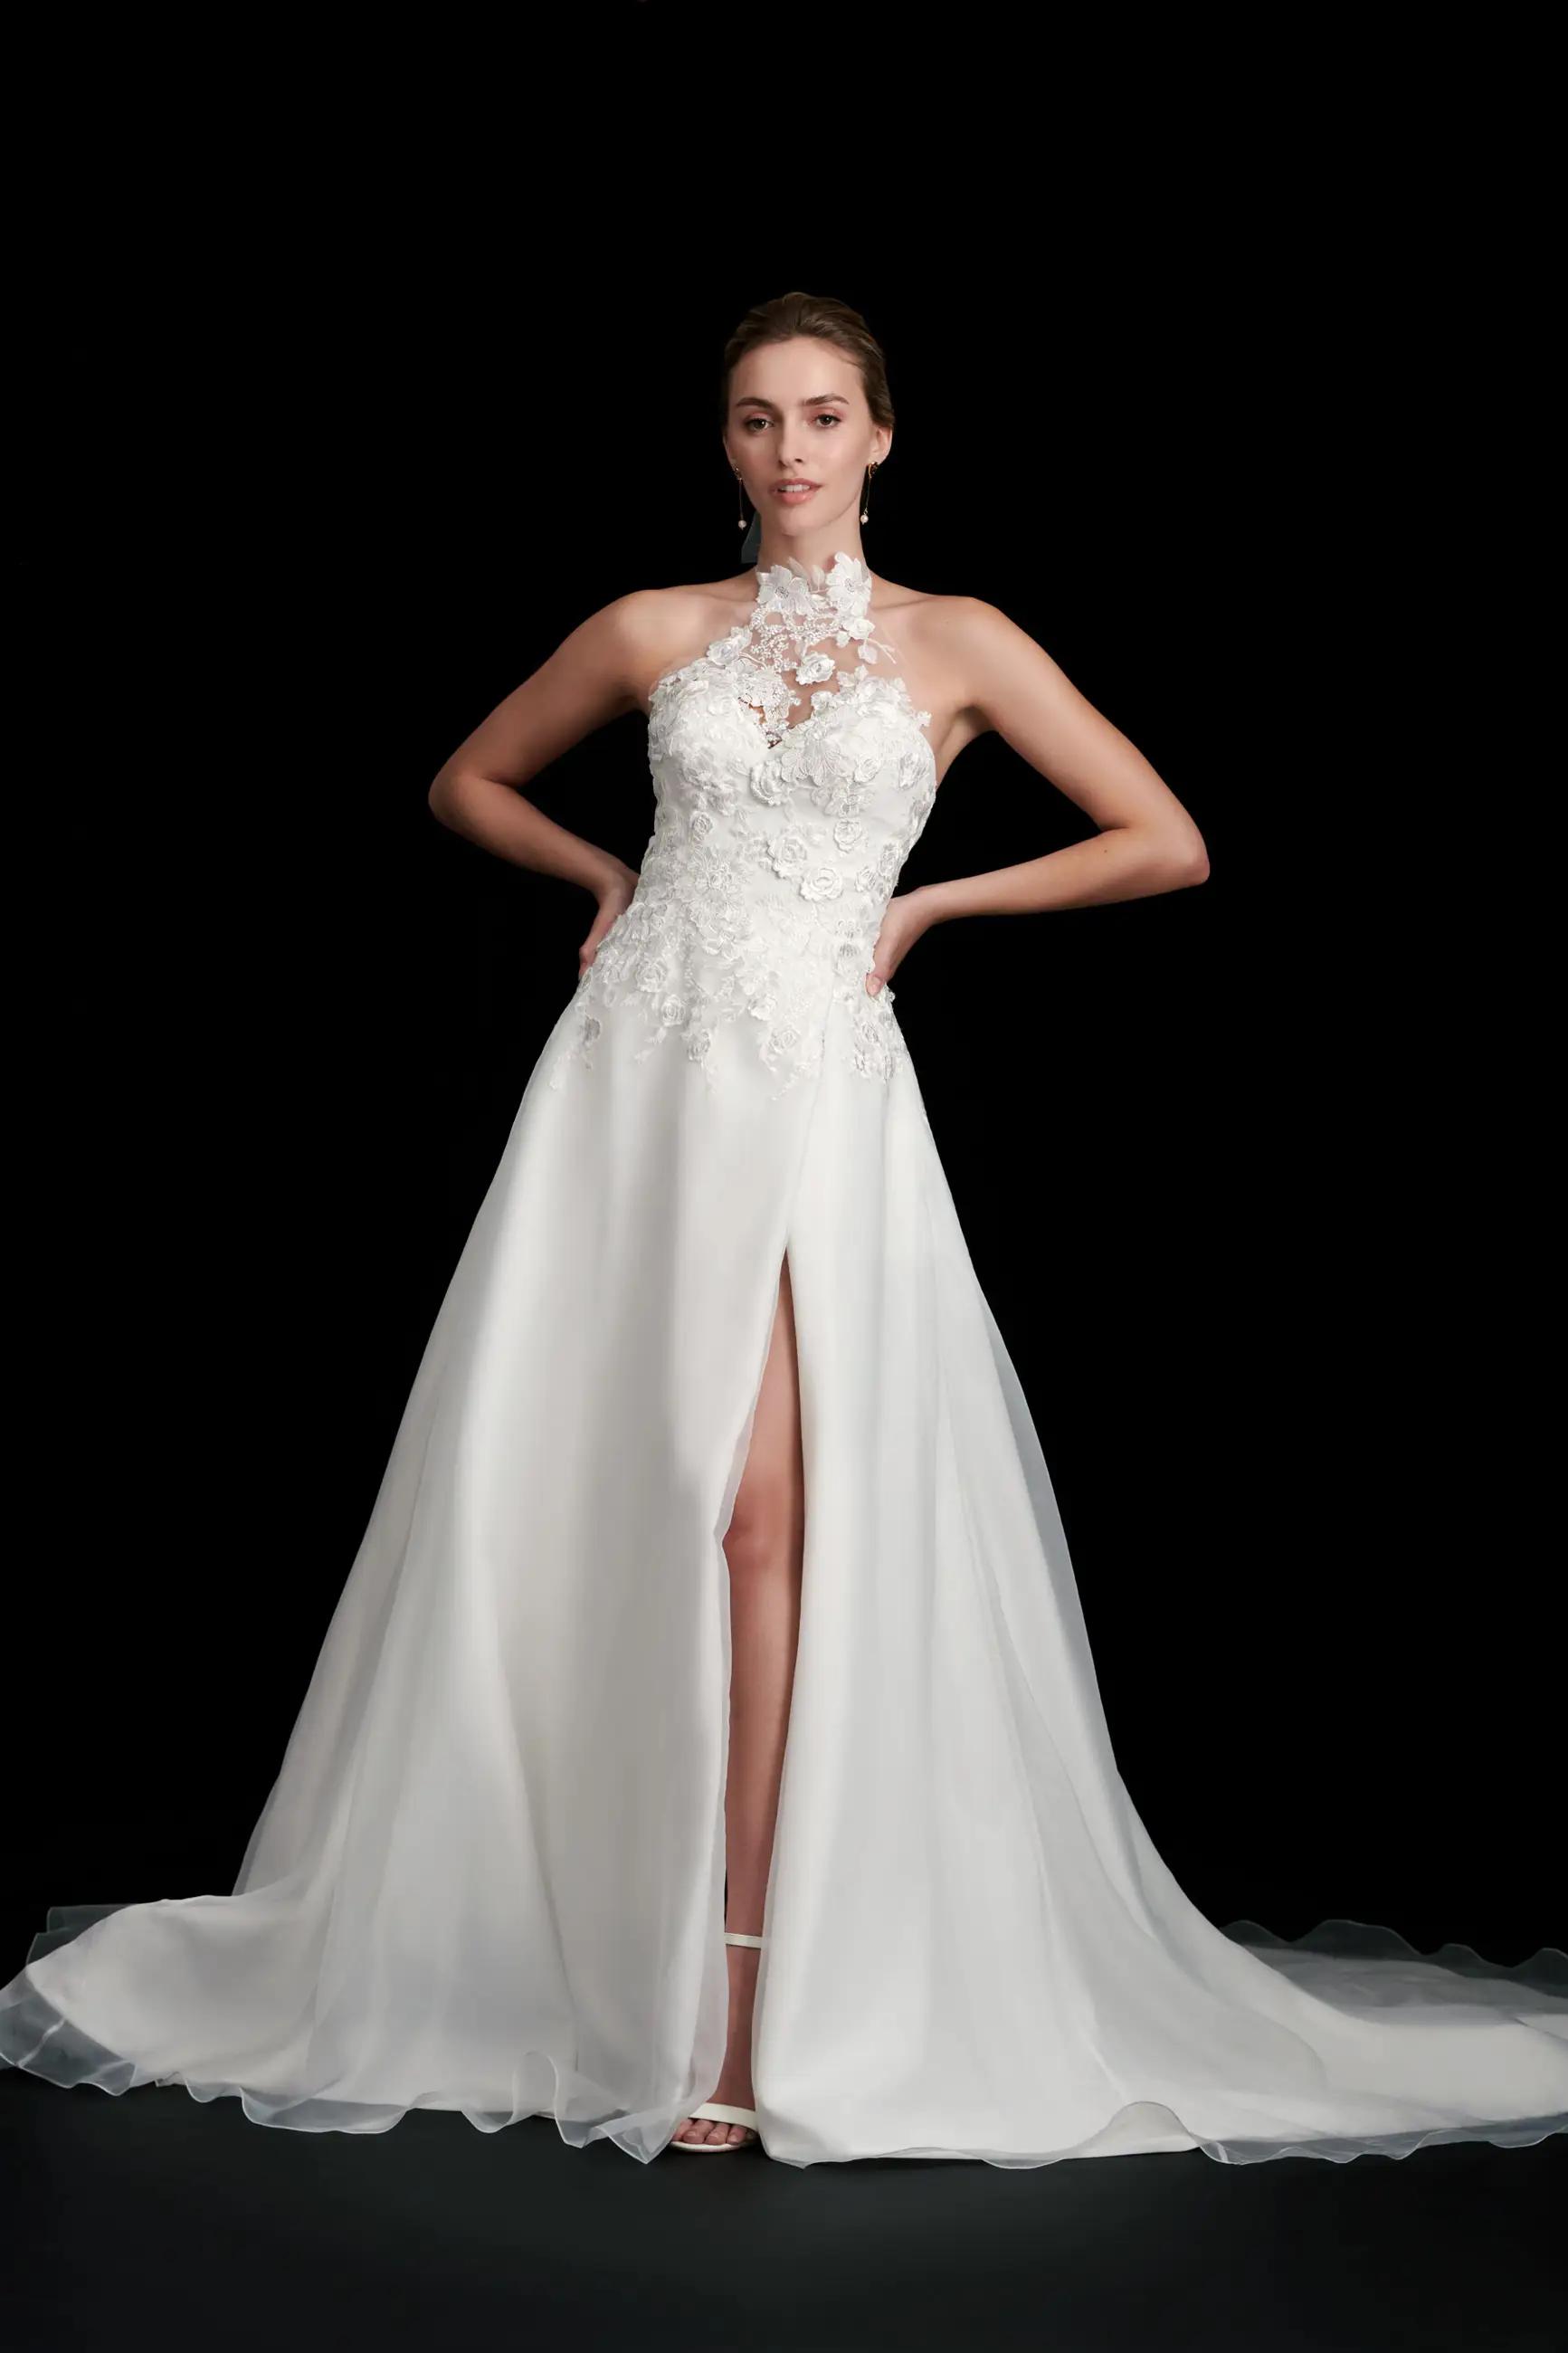 Kenna wedding dress by Kelly Faetanini with removable high mock neckline, applique bodice and a line skirt with a slit